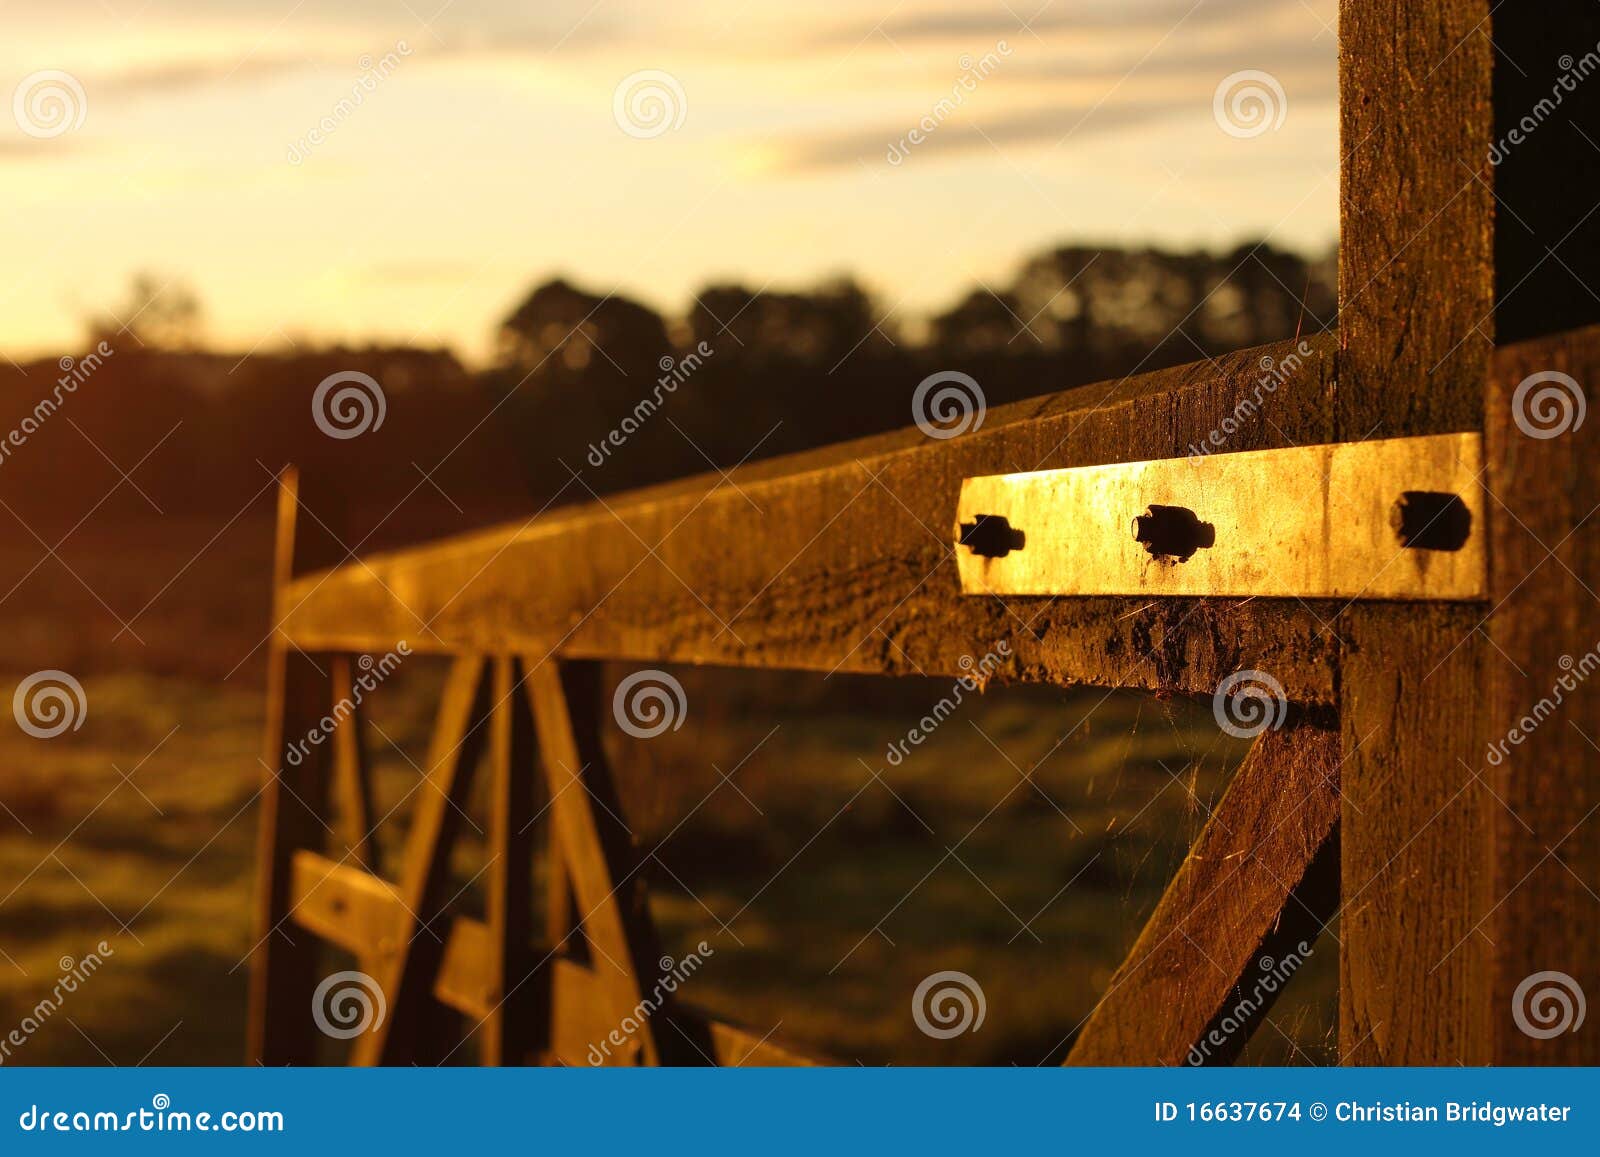 Gate at sunrise. Photograph of a gate taken at sunrise on an autumn morning